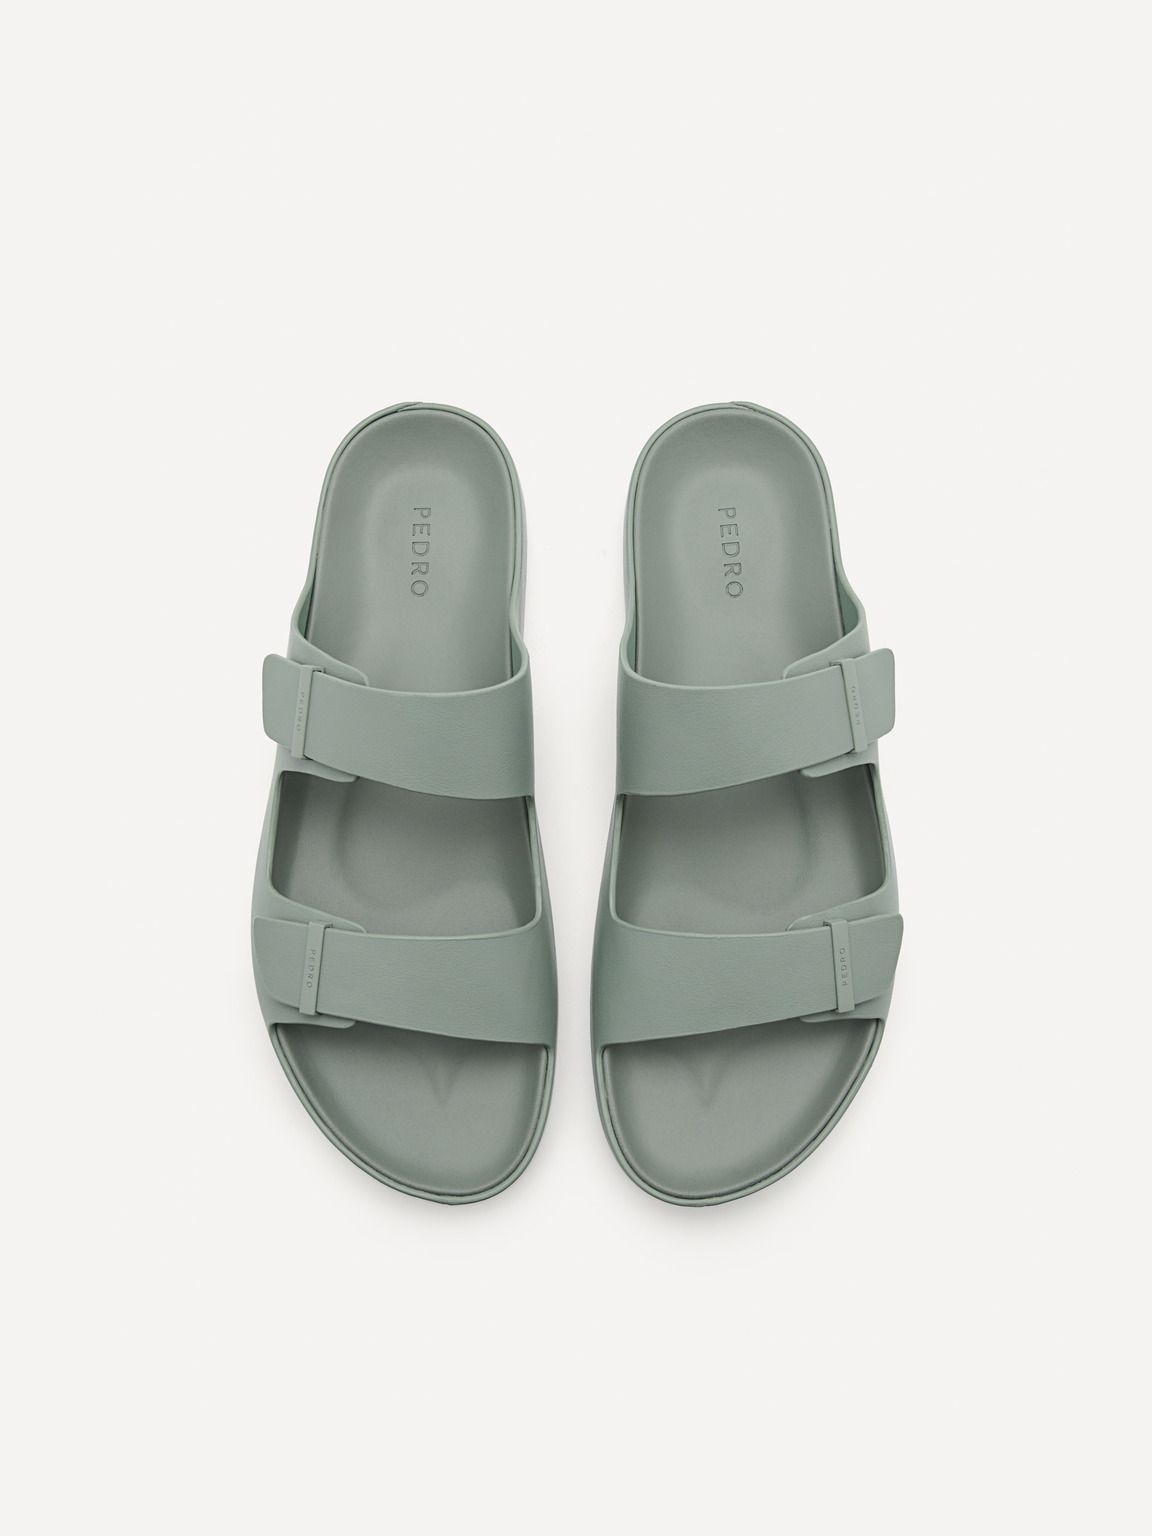 Indy Slide Sandals, Military Green